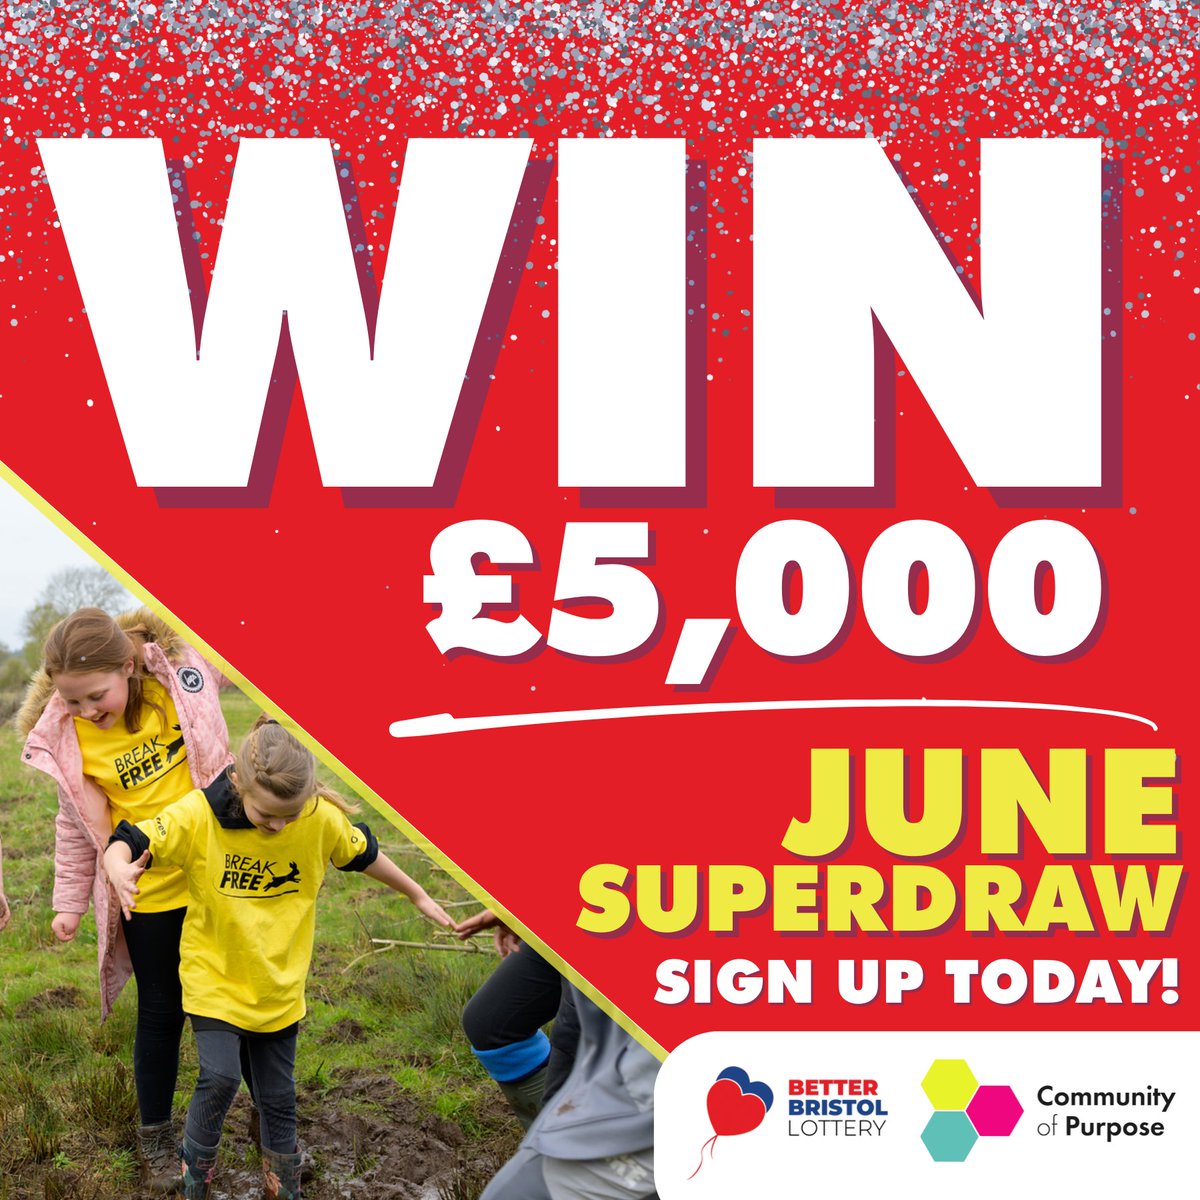 🎉 Join the £5,000 SUPERDRAW! 🎉 With just a £2 ticket, you can enter the Better Bristol Lottery for a chance to win cash prizes, all while contributing to making Bristol better for its young people. 🌟 This June, the Superdraw prize is an incredible £5,000! Don't miss out!